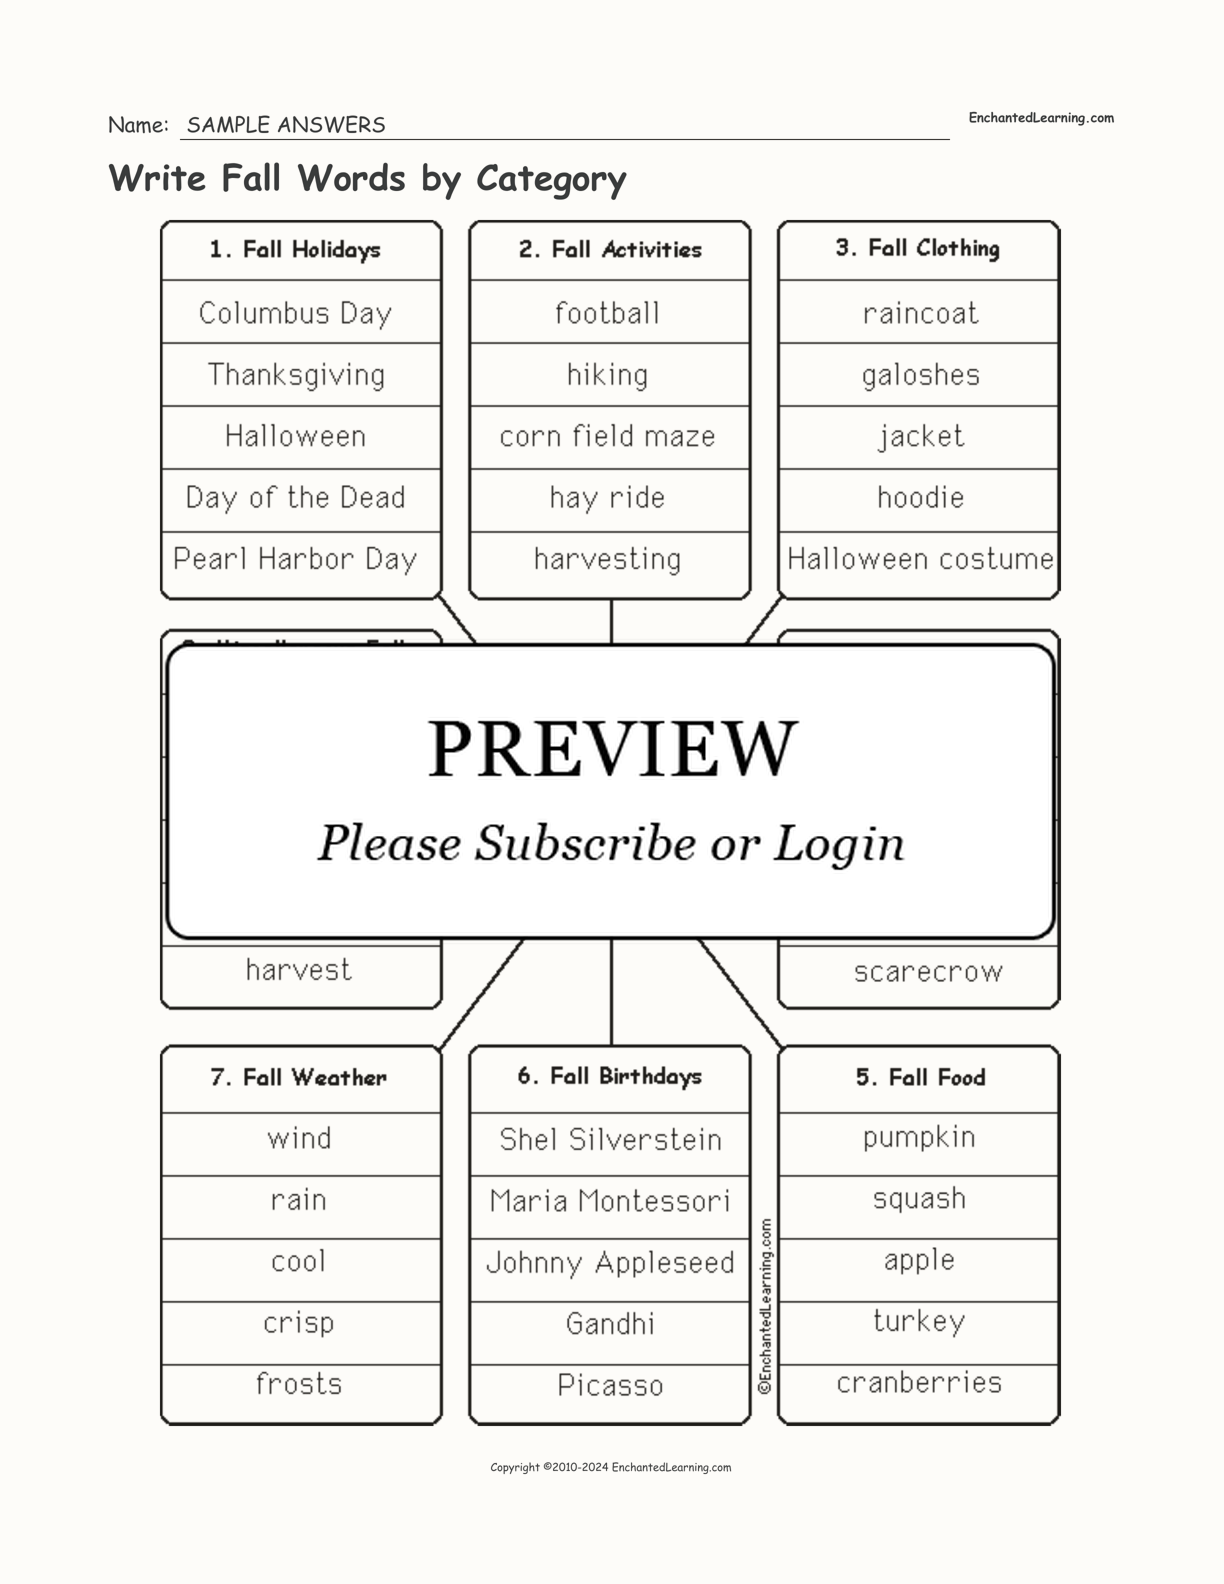 Write Fall Words by Category interactive worksheet page 2